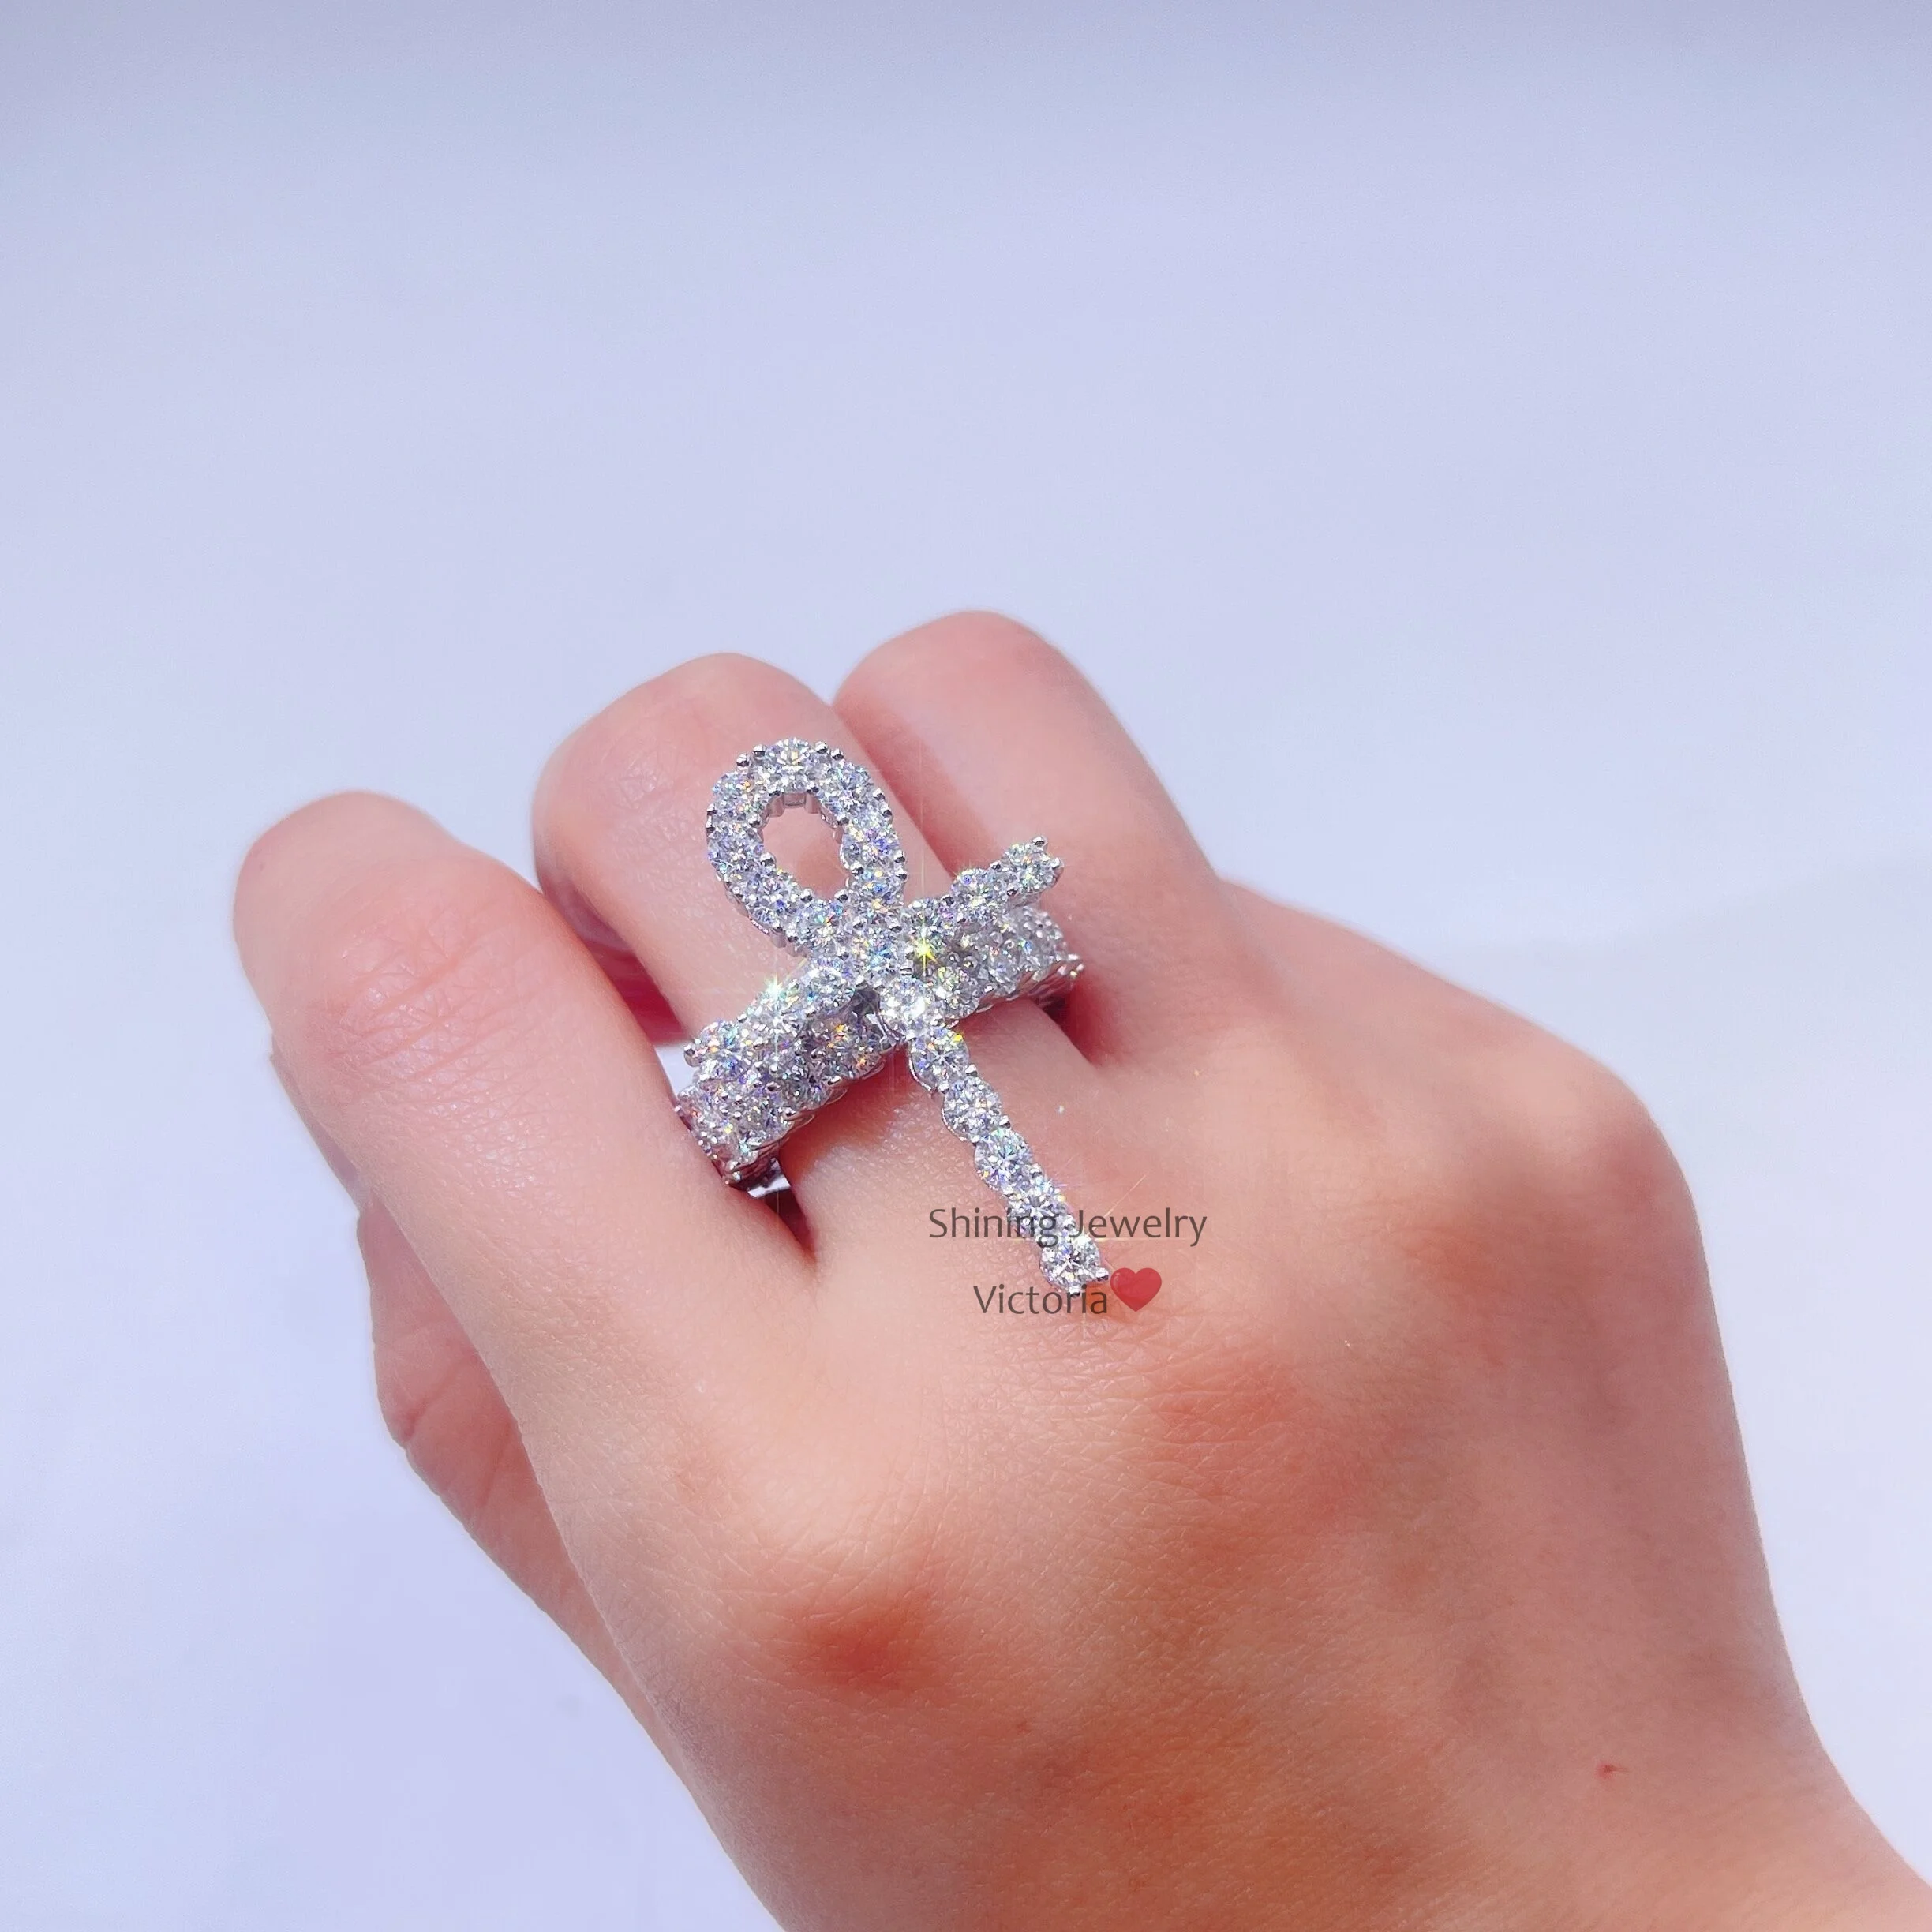 Drop Shipping Solid Silver 925 Hip Hop Vvs Moissanite Iced Out Ankh Cross  Ring - Buy Ankh Cross Ring,Cross Ring,Iced Out Cross Ring Product on  Alibaba.com